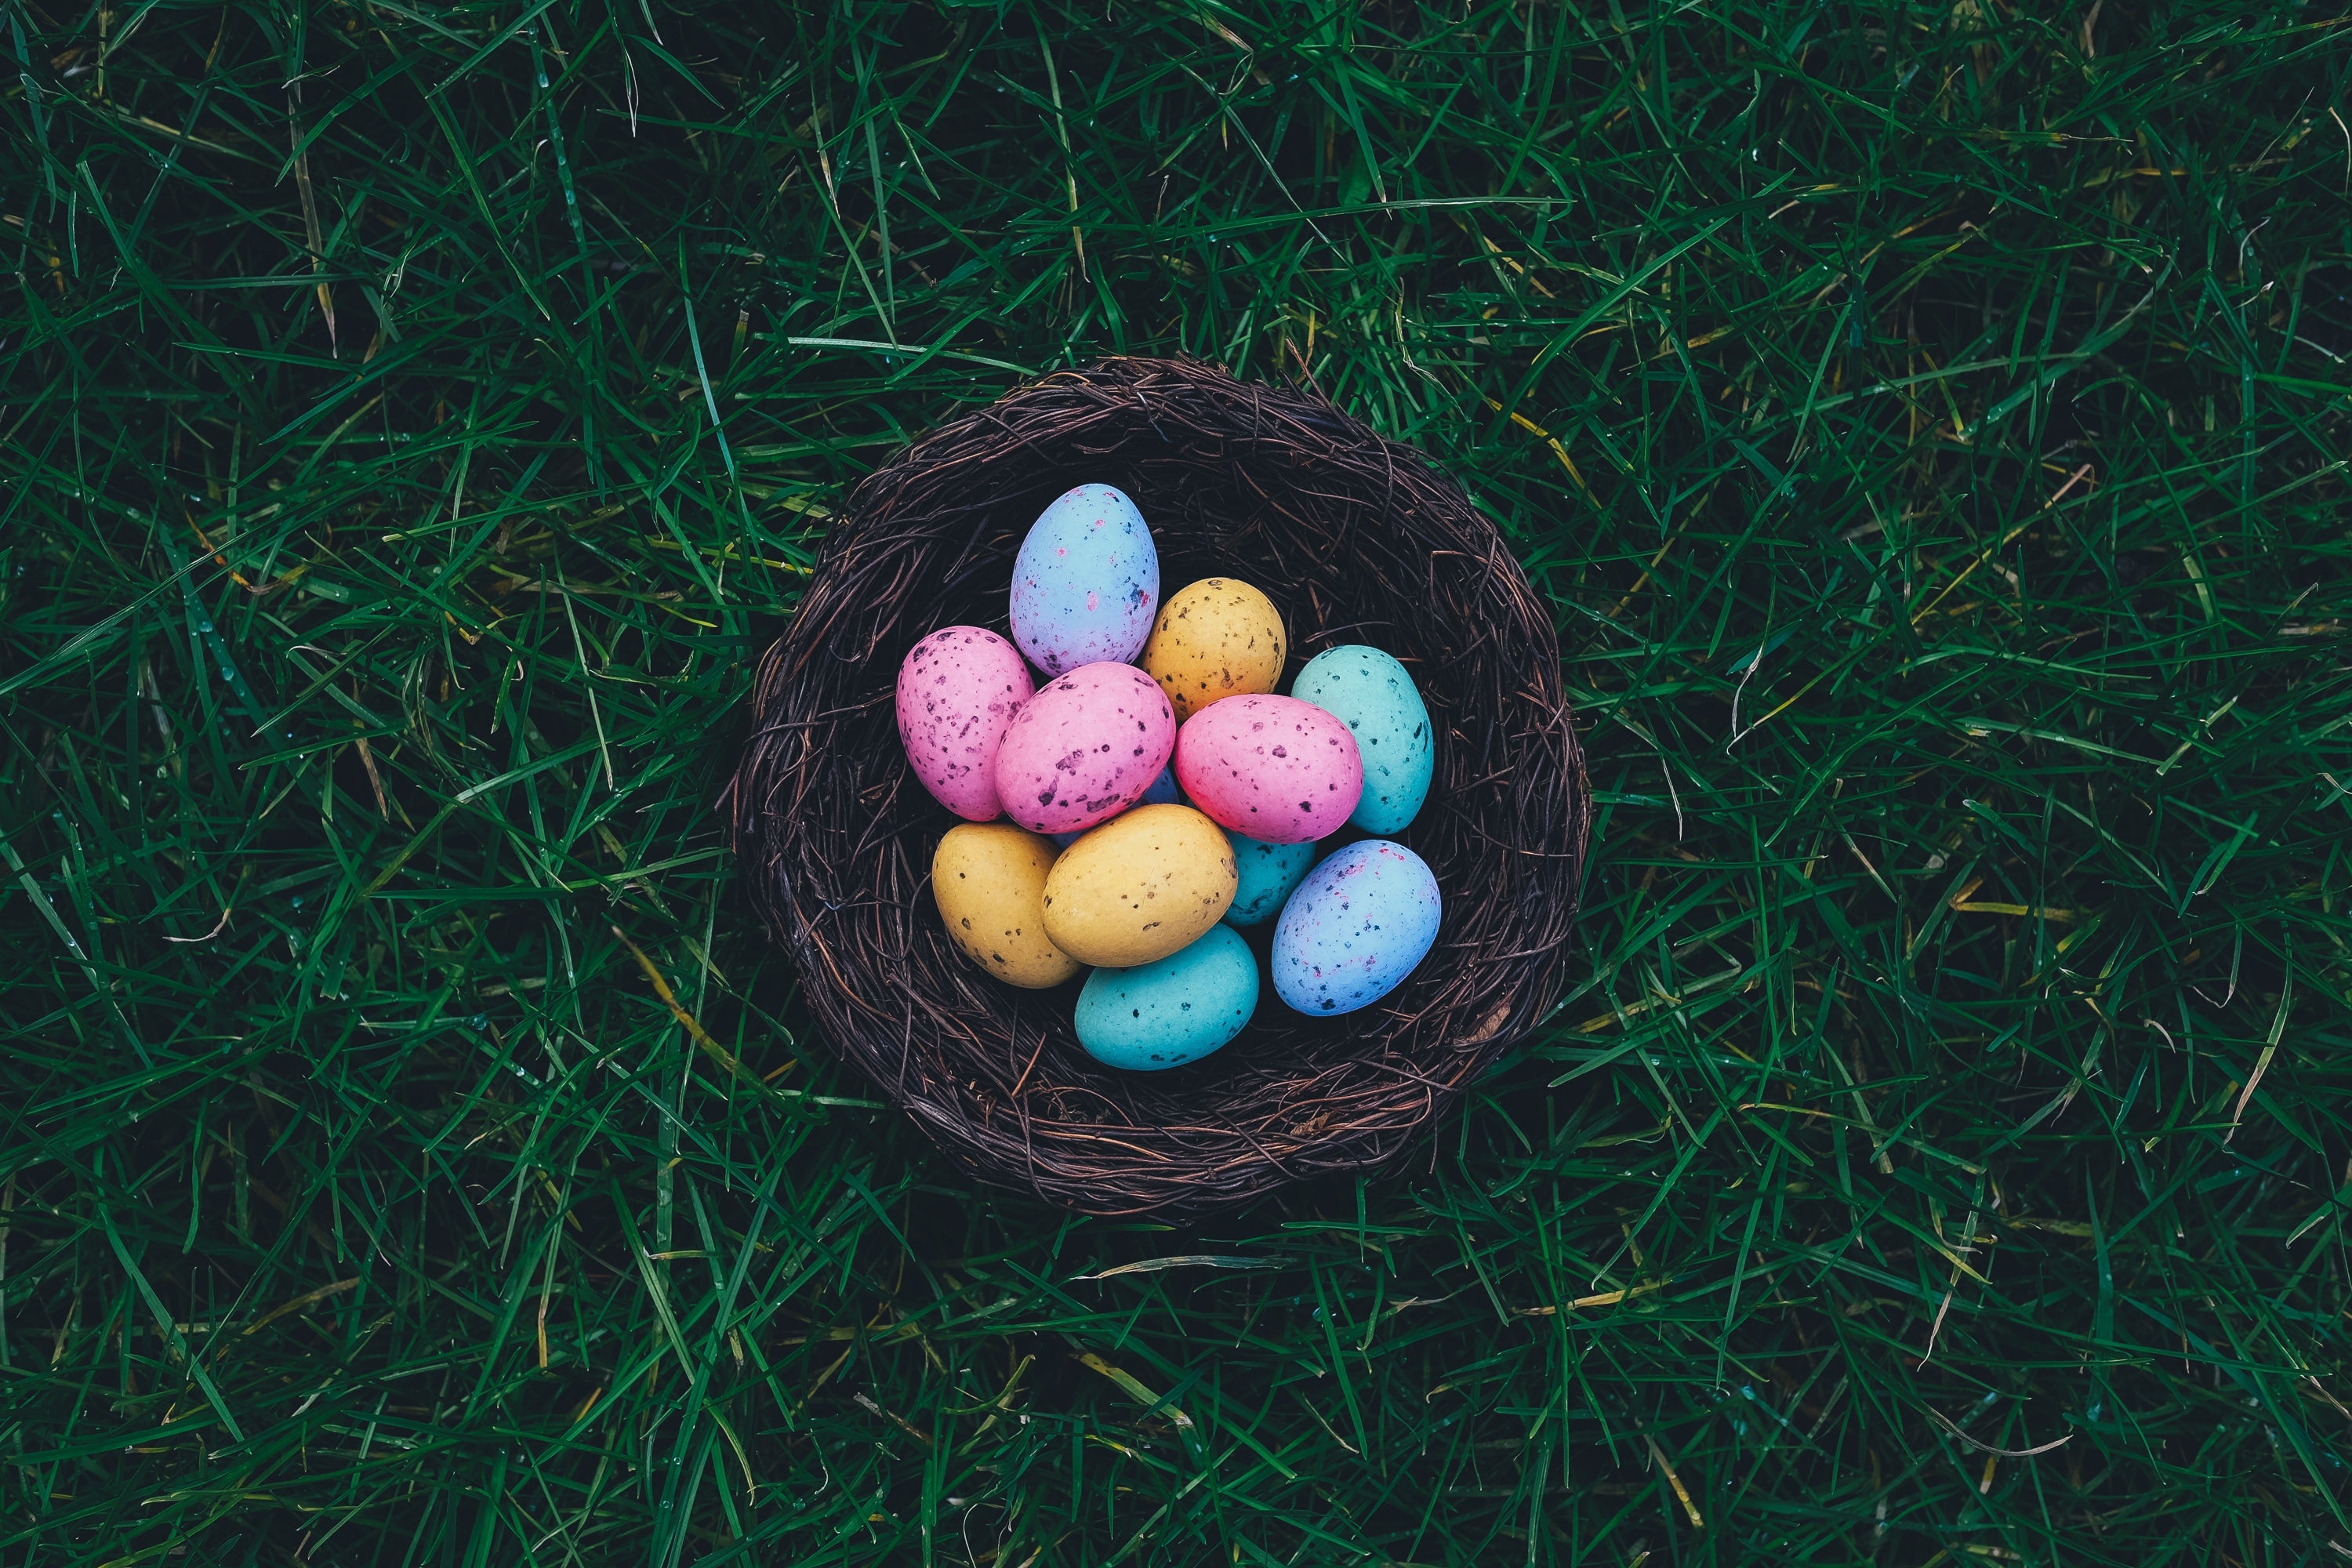 With all the chocolate and Easter egg hunts, how can we not only remind  little ones of Easter's true meaning, but excite them about it? �